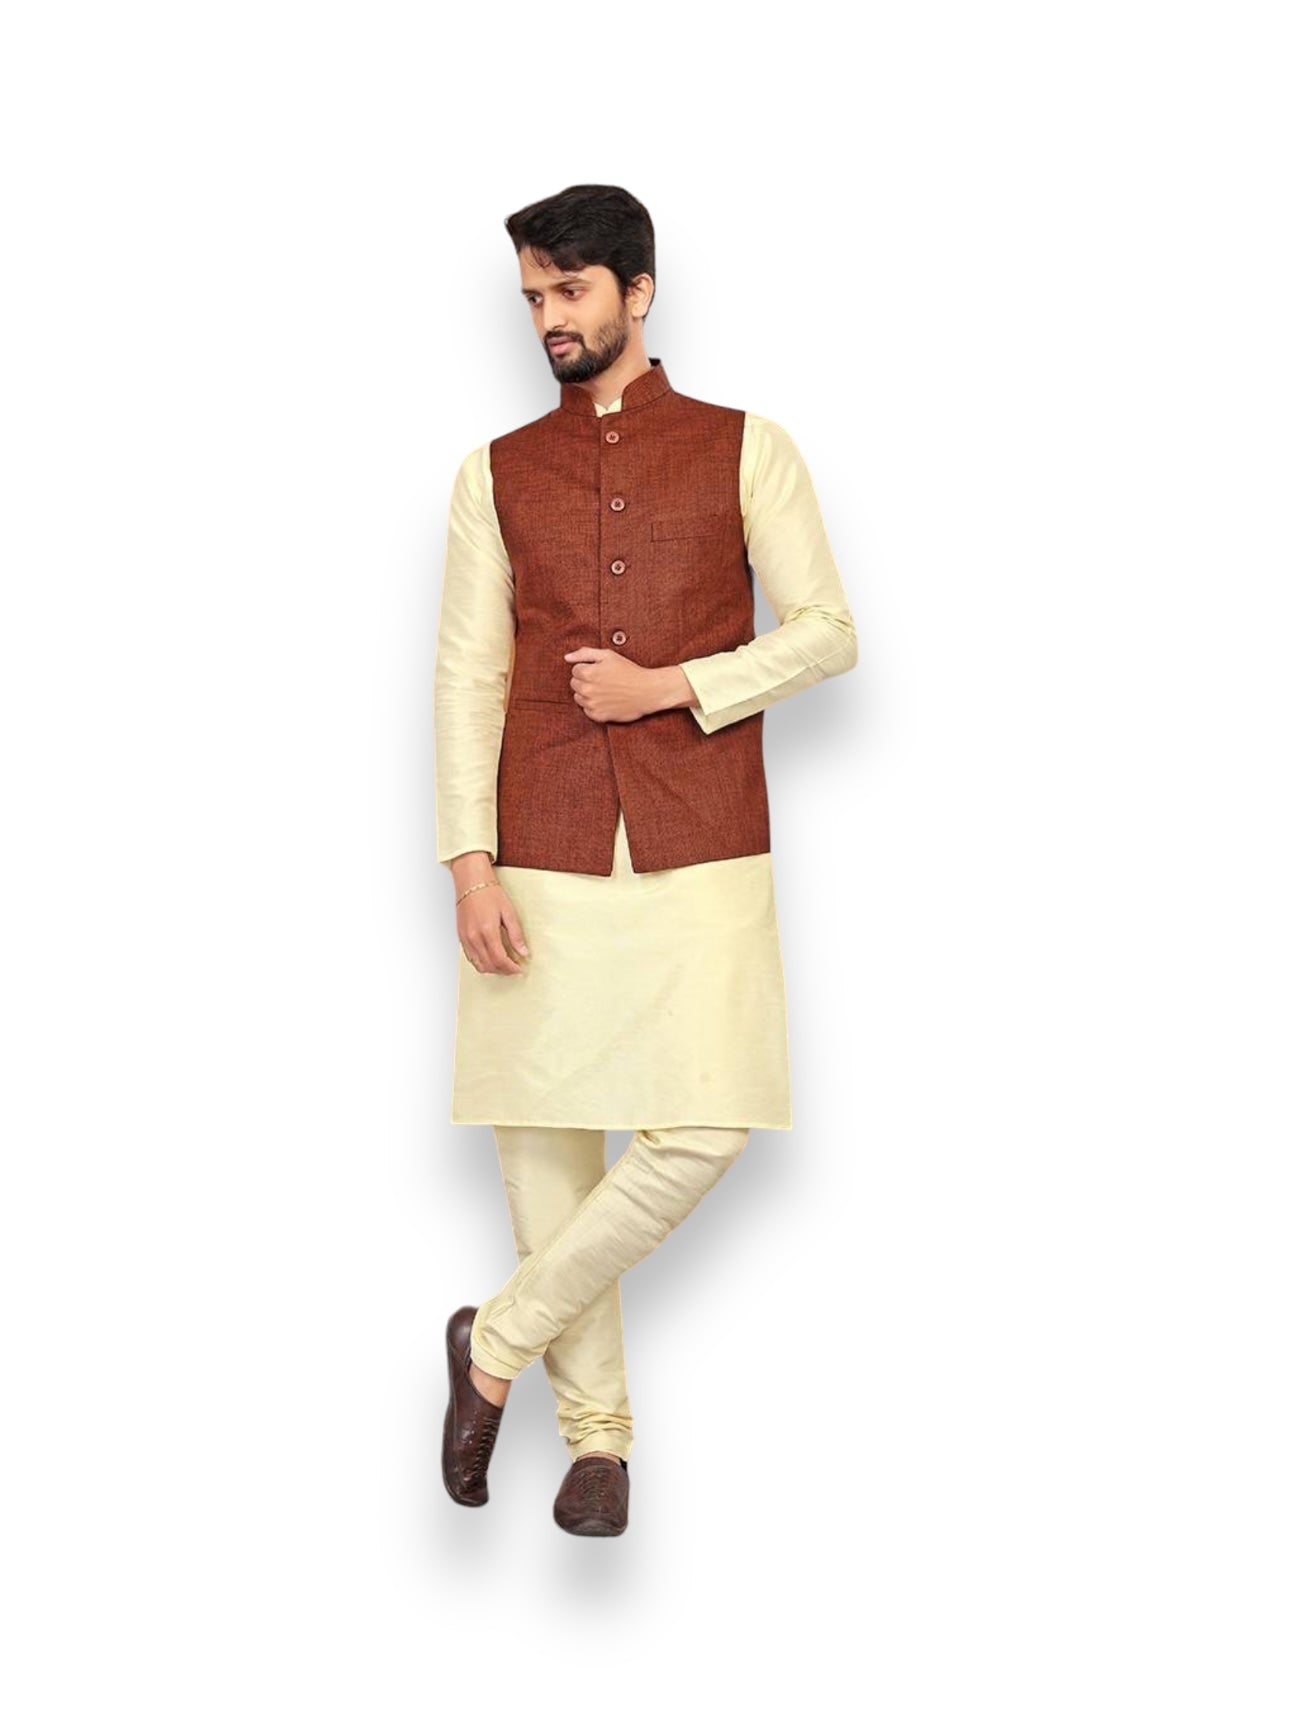 Brown Color Ethnic Wear Mens Kurta Pajama With Jacket Collection